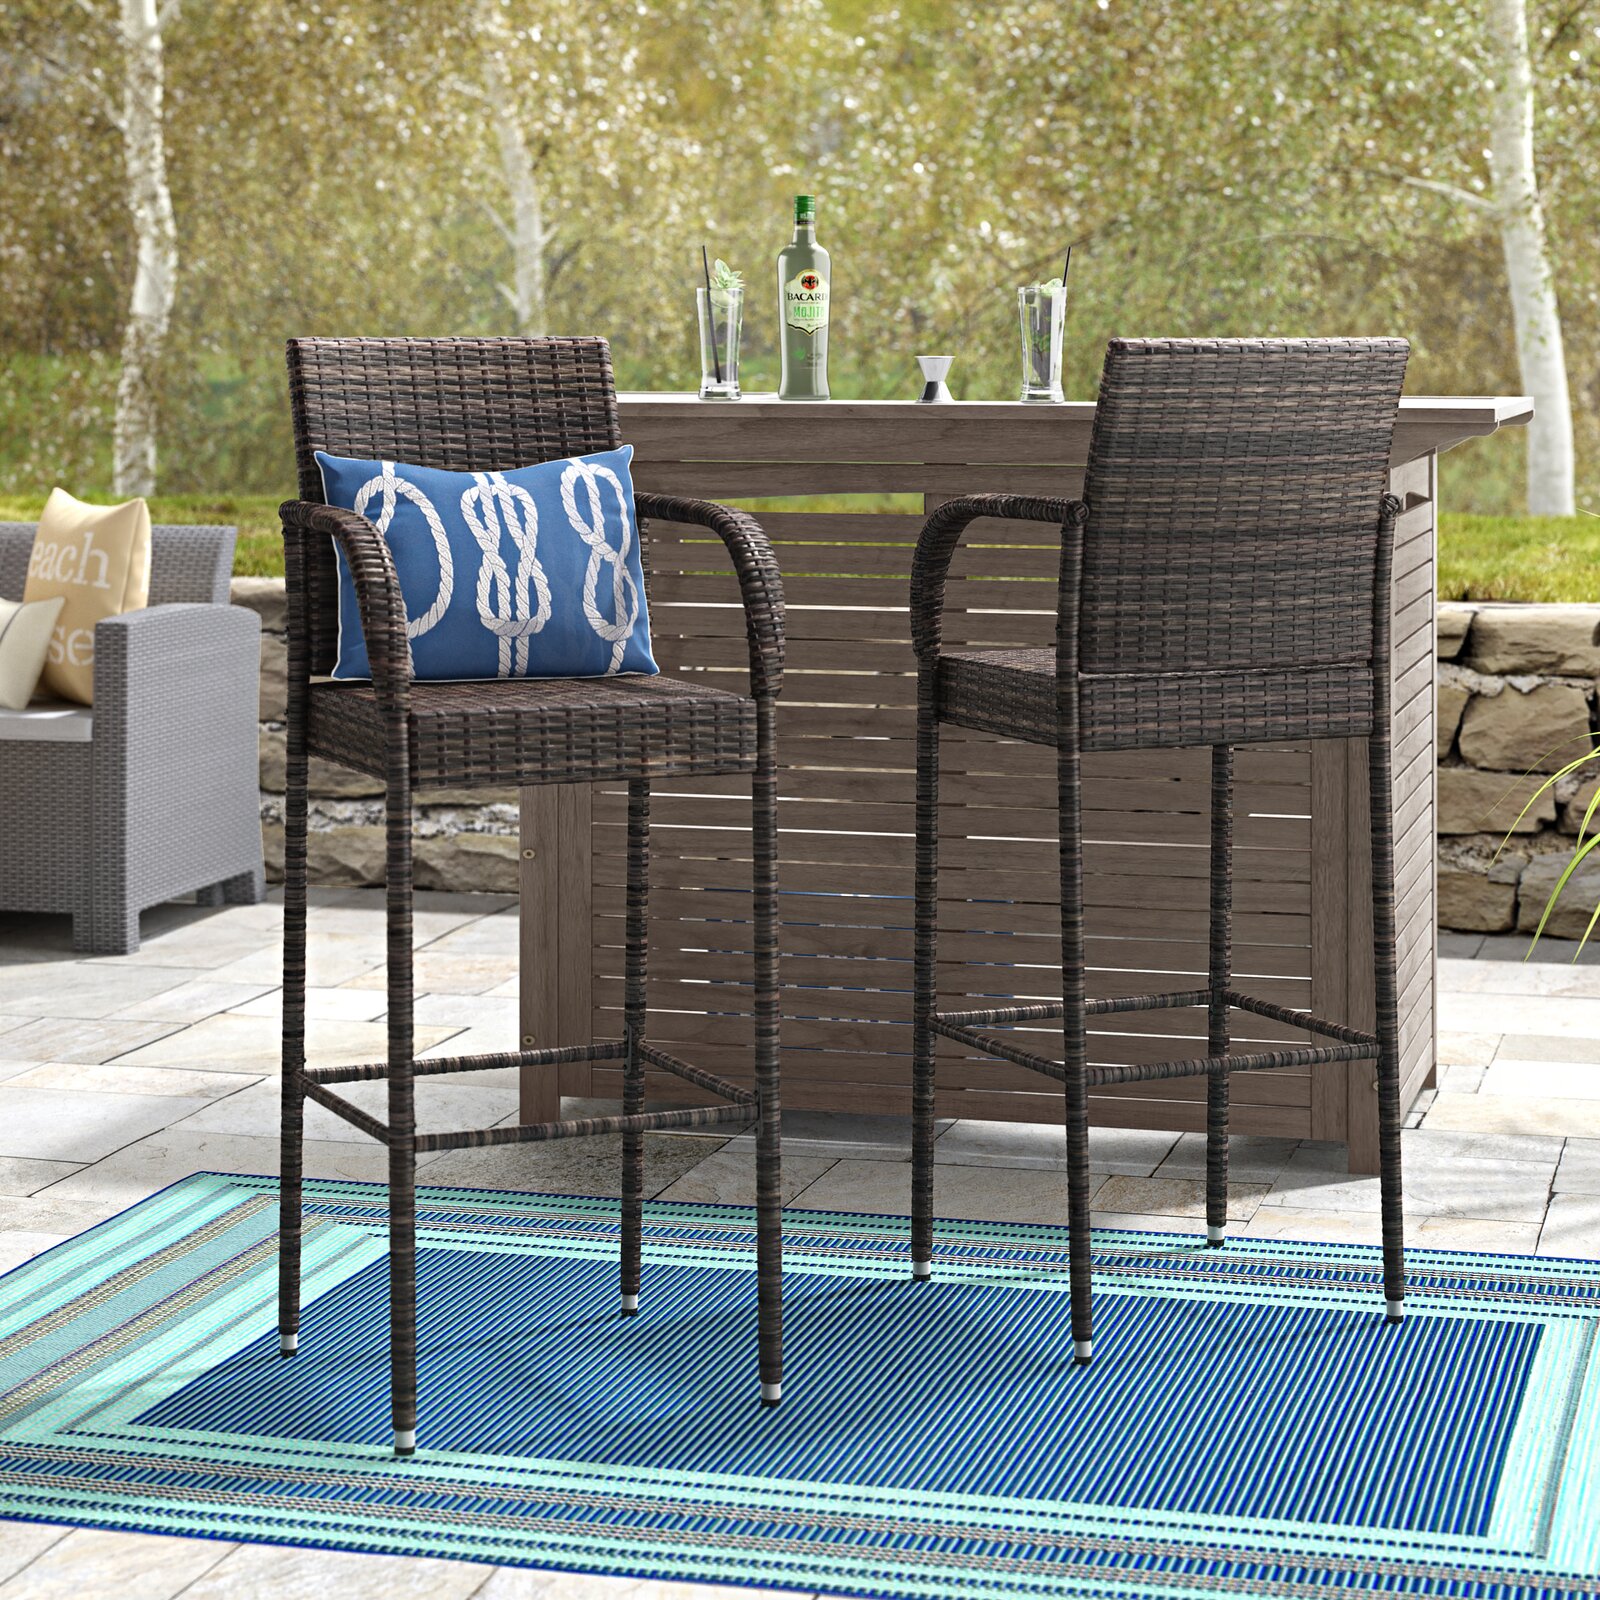 Outdoor Brown Wicker Barstool, UHOMEPRO Outdoor Patio Furniture Bar Stool Set of 2, Rattan Bar Chairs with Iron Frame, Armrest, Footrest, Counter Height Chairs for Garden Pool Lawn Backyard, W2114 - image 1 of 11